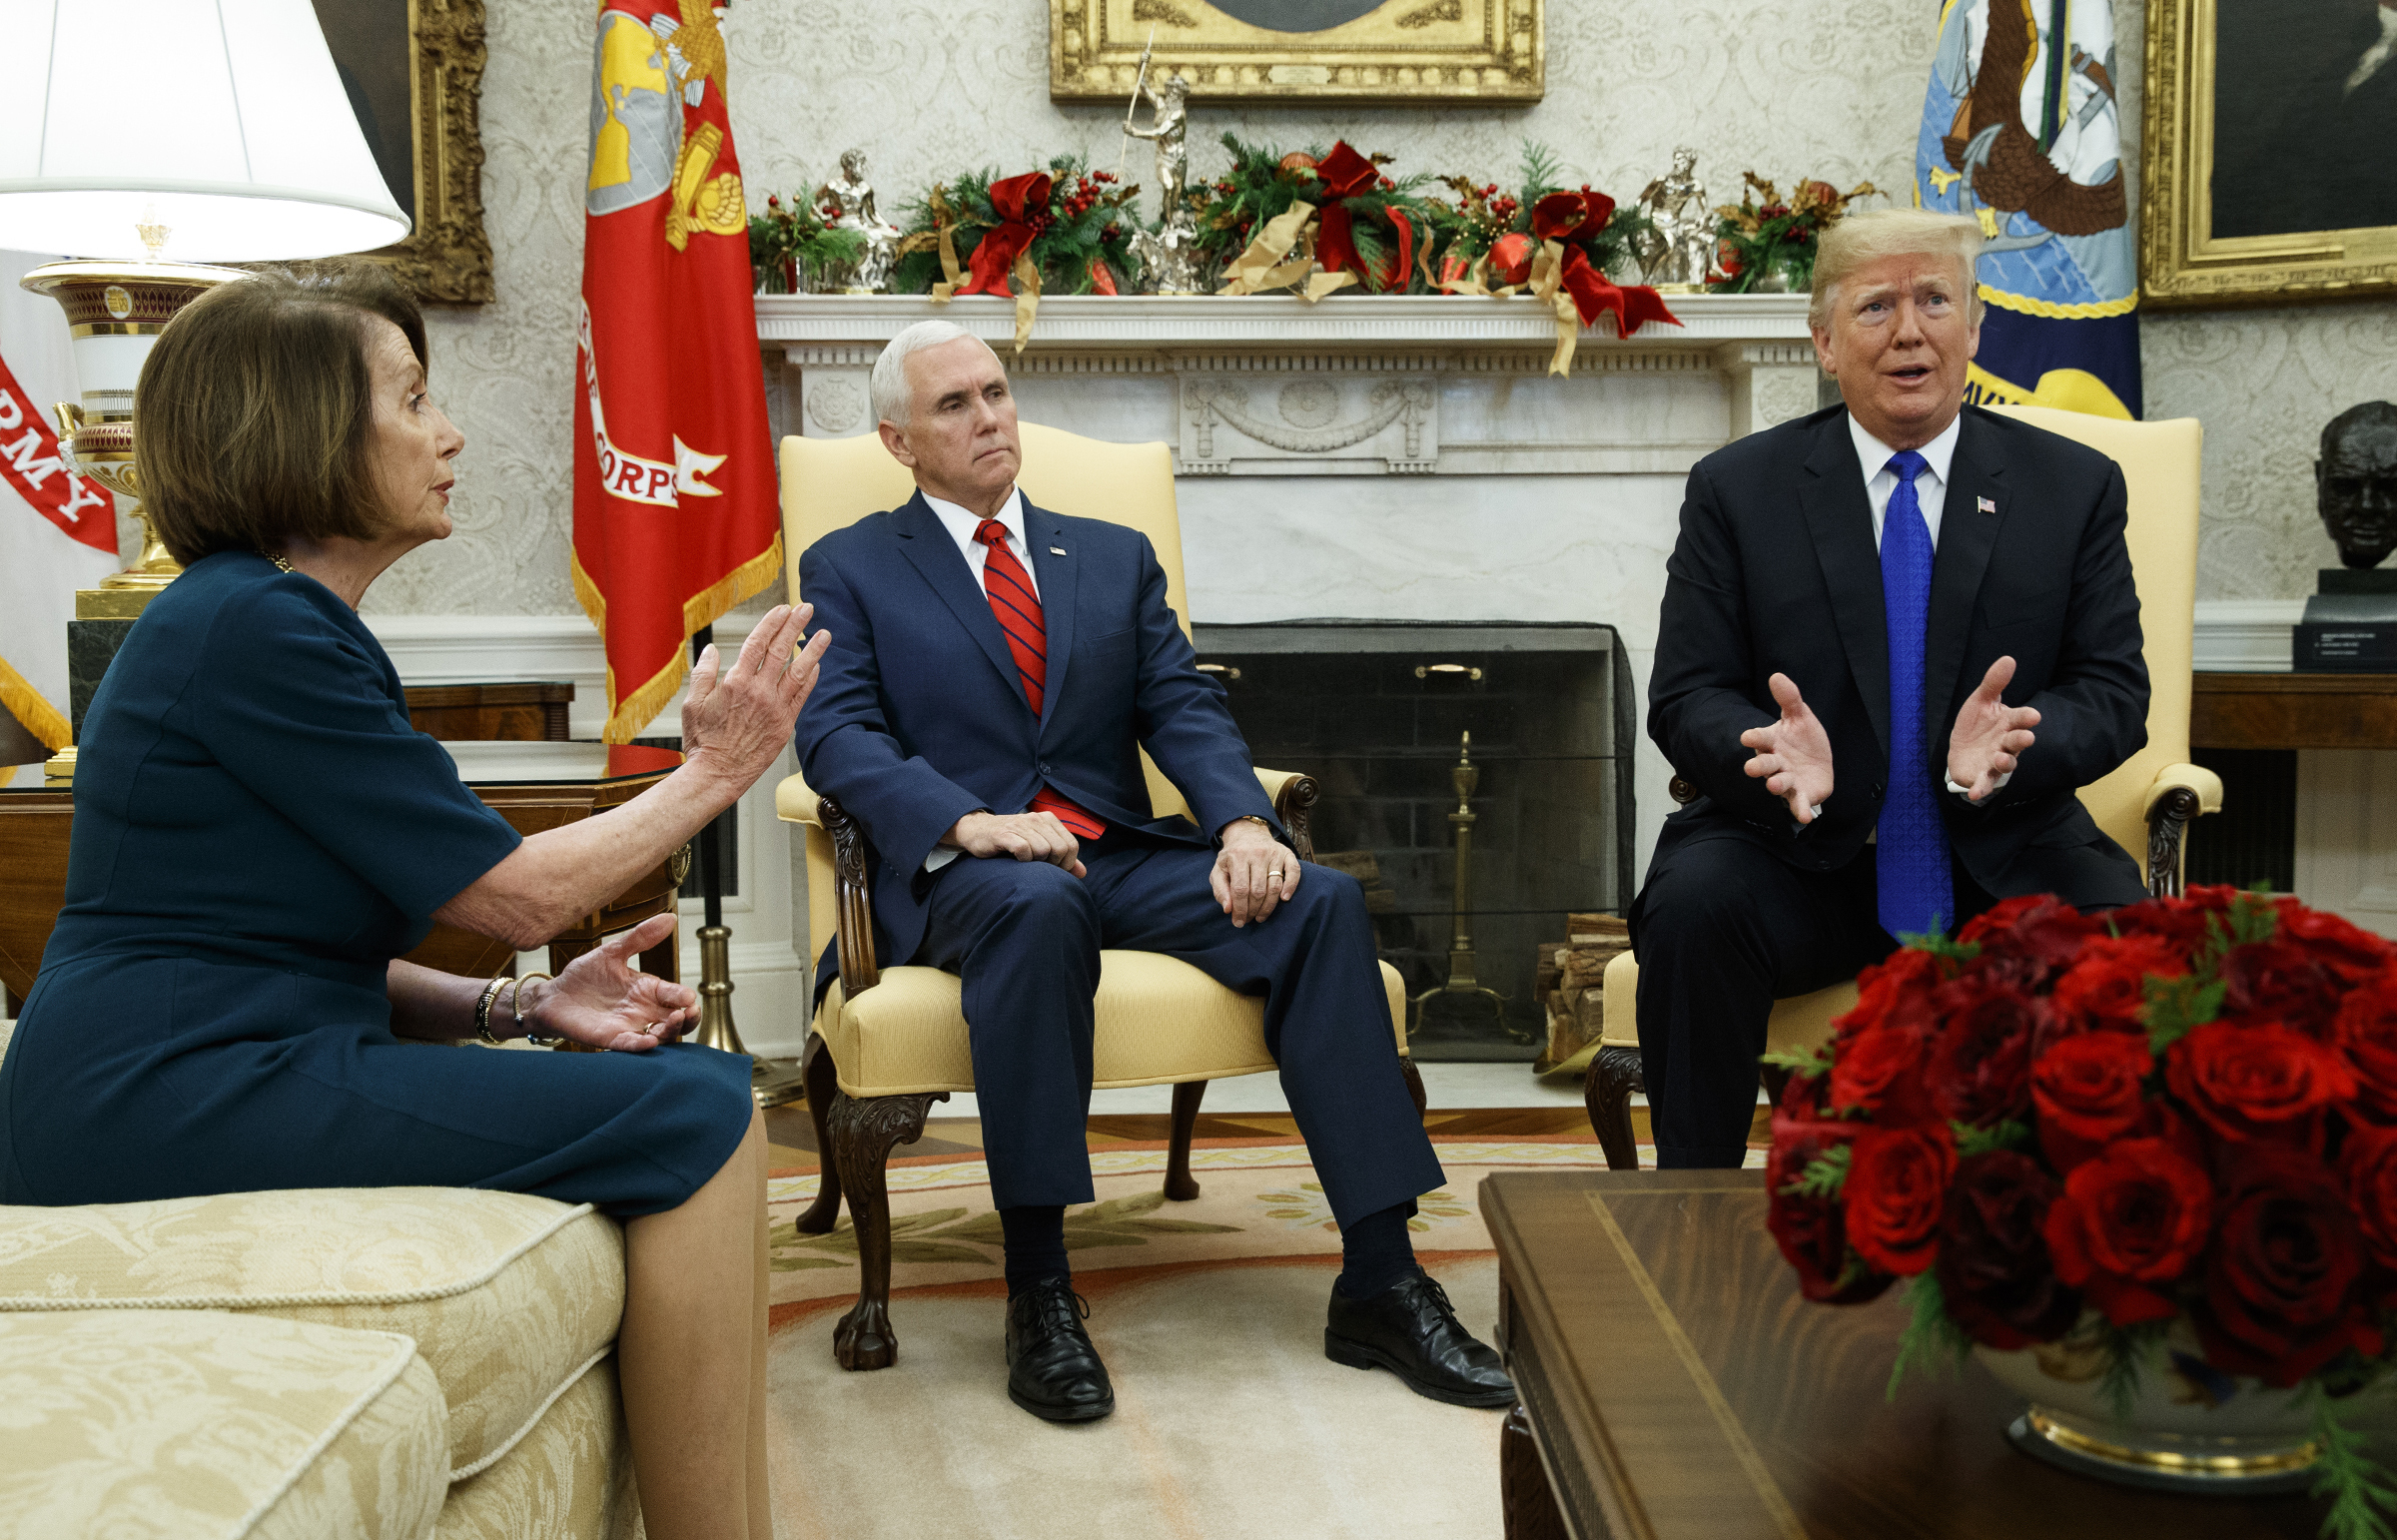 Vice President Mike Pence, center, looks on as House Minority Leader Rep. Nancy Pelosi, D-Calif., and President Donald Trump speak during a meeting in the Oval Office of the White House